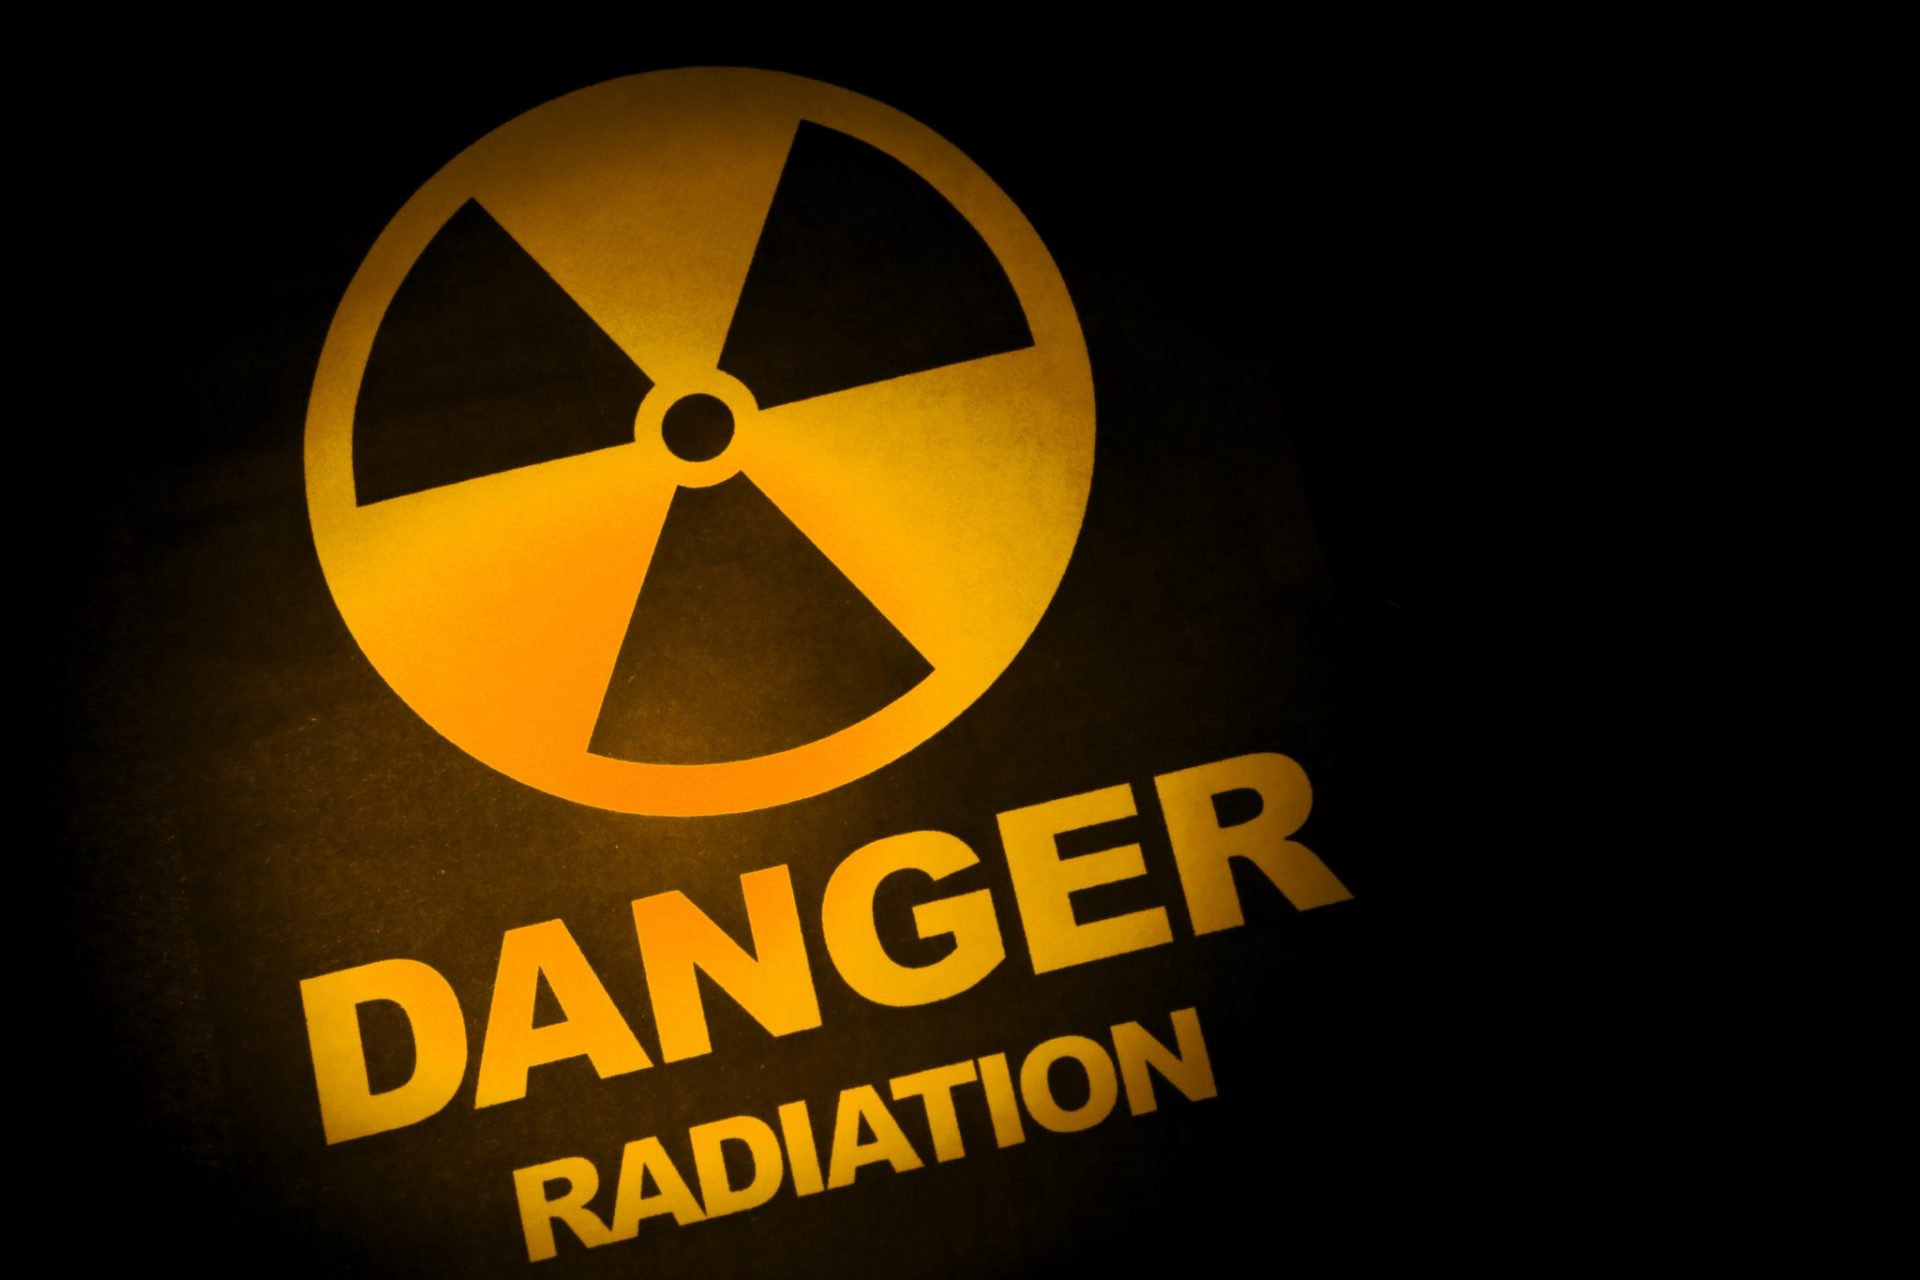 Low dose radiation has lethal side effects